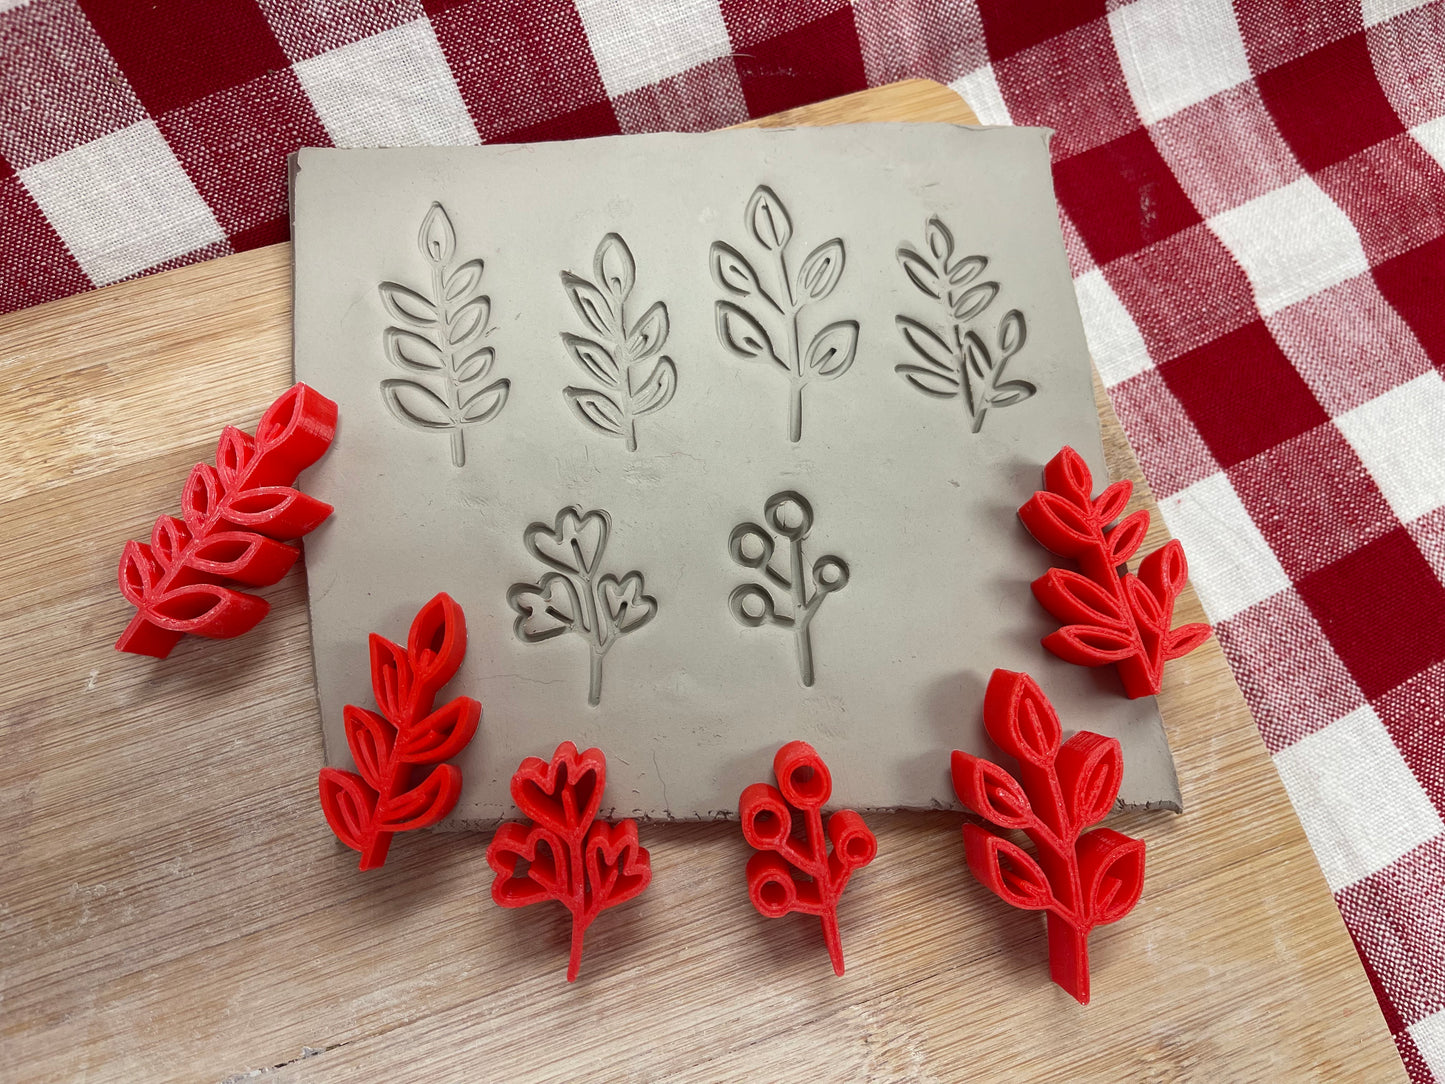 Elements Autumn Stamp Series - mini Greenery/Branches design set of 6, plastic 3D printed, Pottery Tool